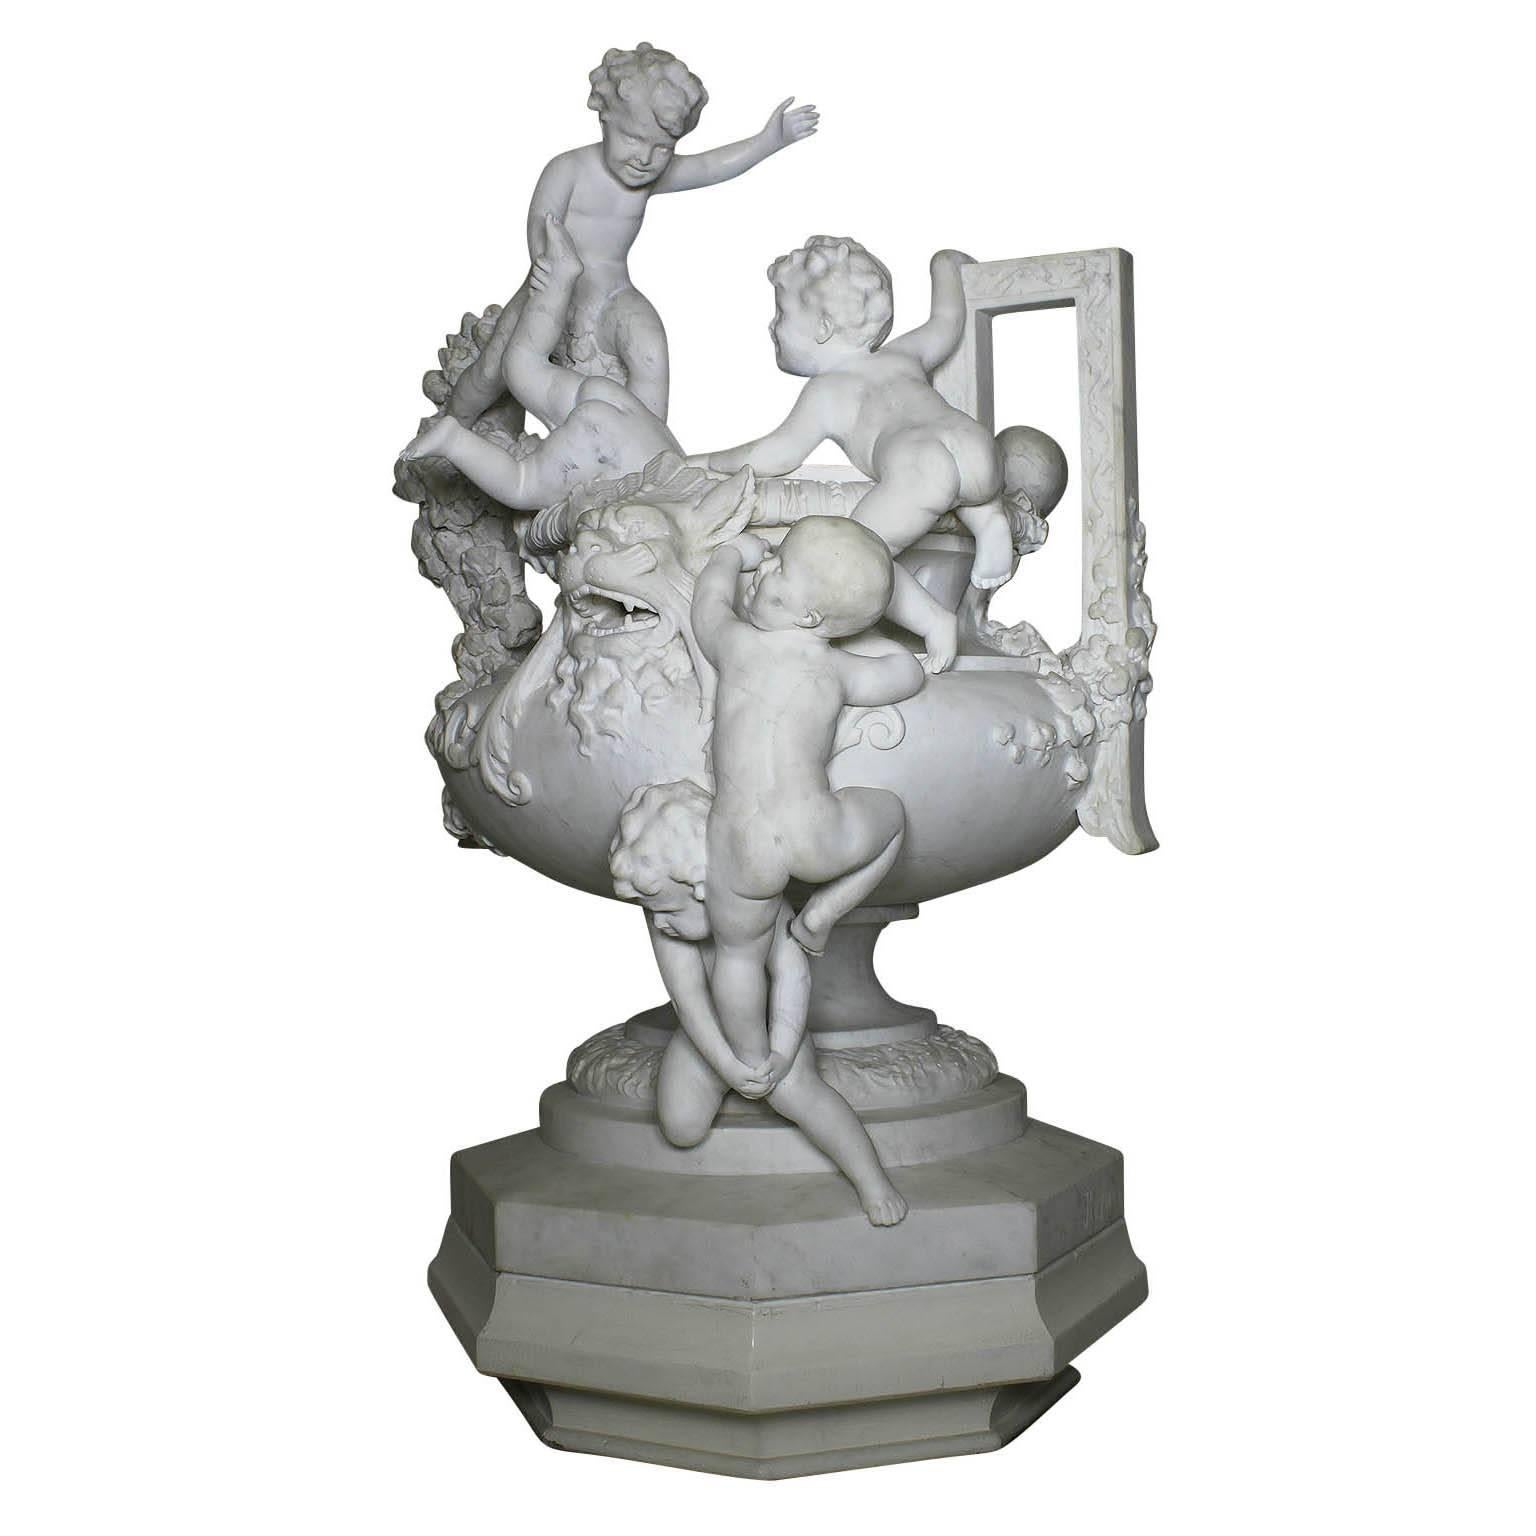 A very fine large, rare and charming, French, 19th century. Belle Époque carved white marble whimsical figural urn fountain depicting children climbing on an urn with flowers and garlands, influenced in the Louis XV style, by Joseph Reynés I Gurgui